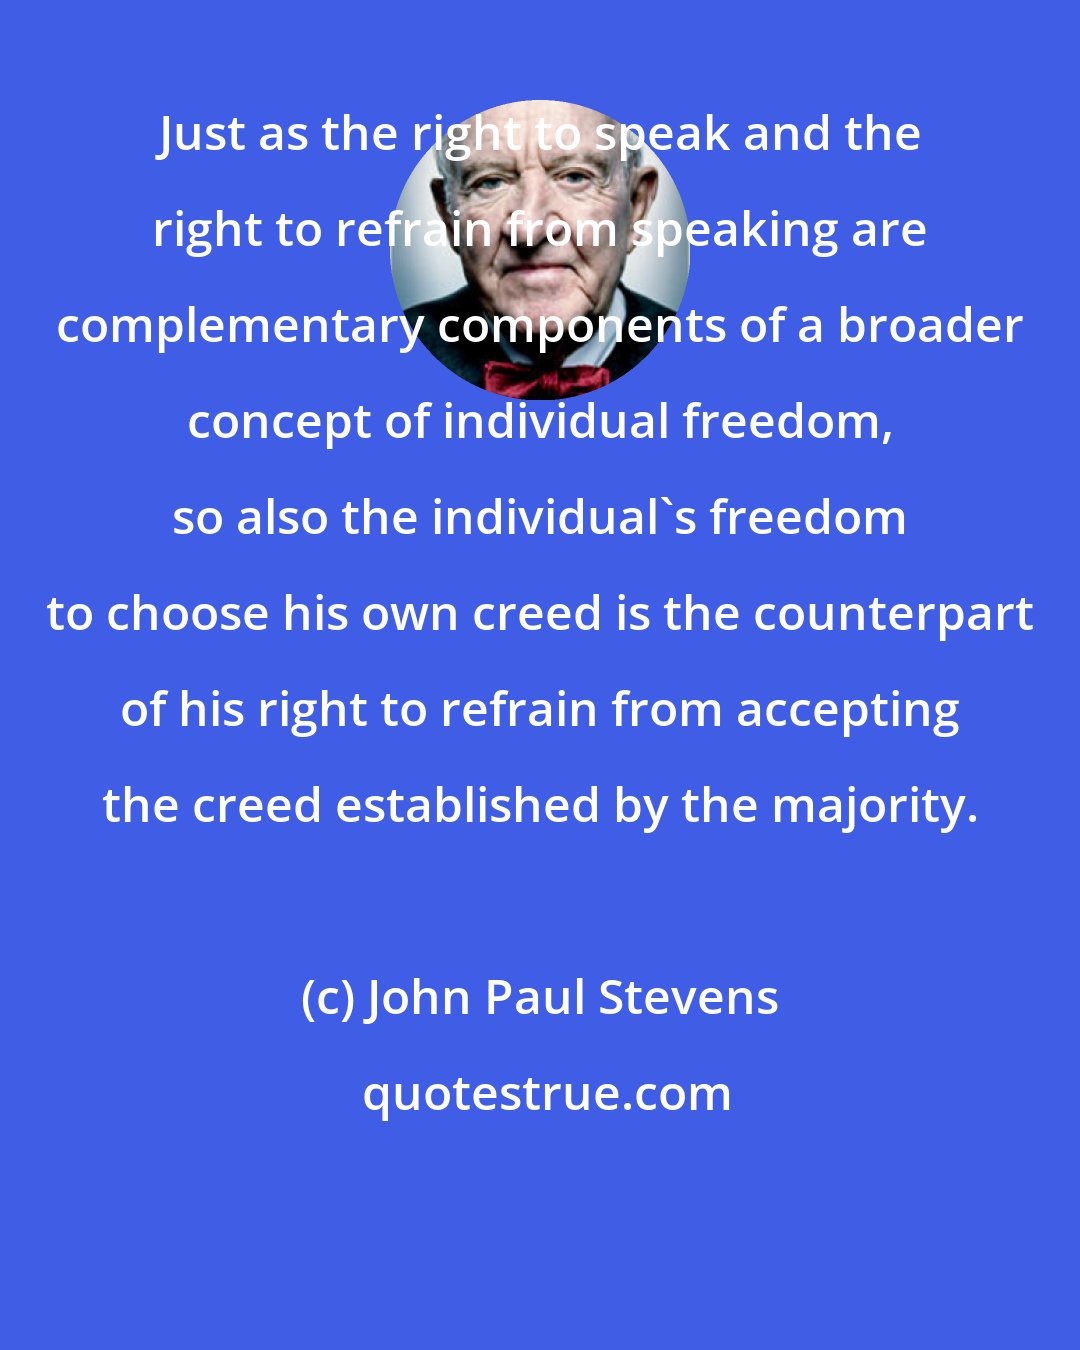 John Paul Stevens: Just as the right to speak and the right to refrain from speaking are complementary components of a broader concept of individual freedom, so also the individual's freedom to choose his own creed is the counterpart of his right to refrain from accepting the creed established by the majority.